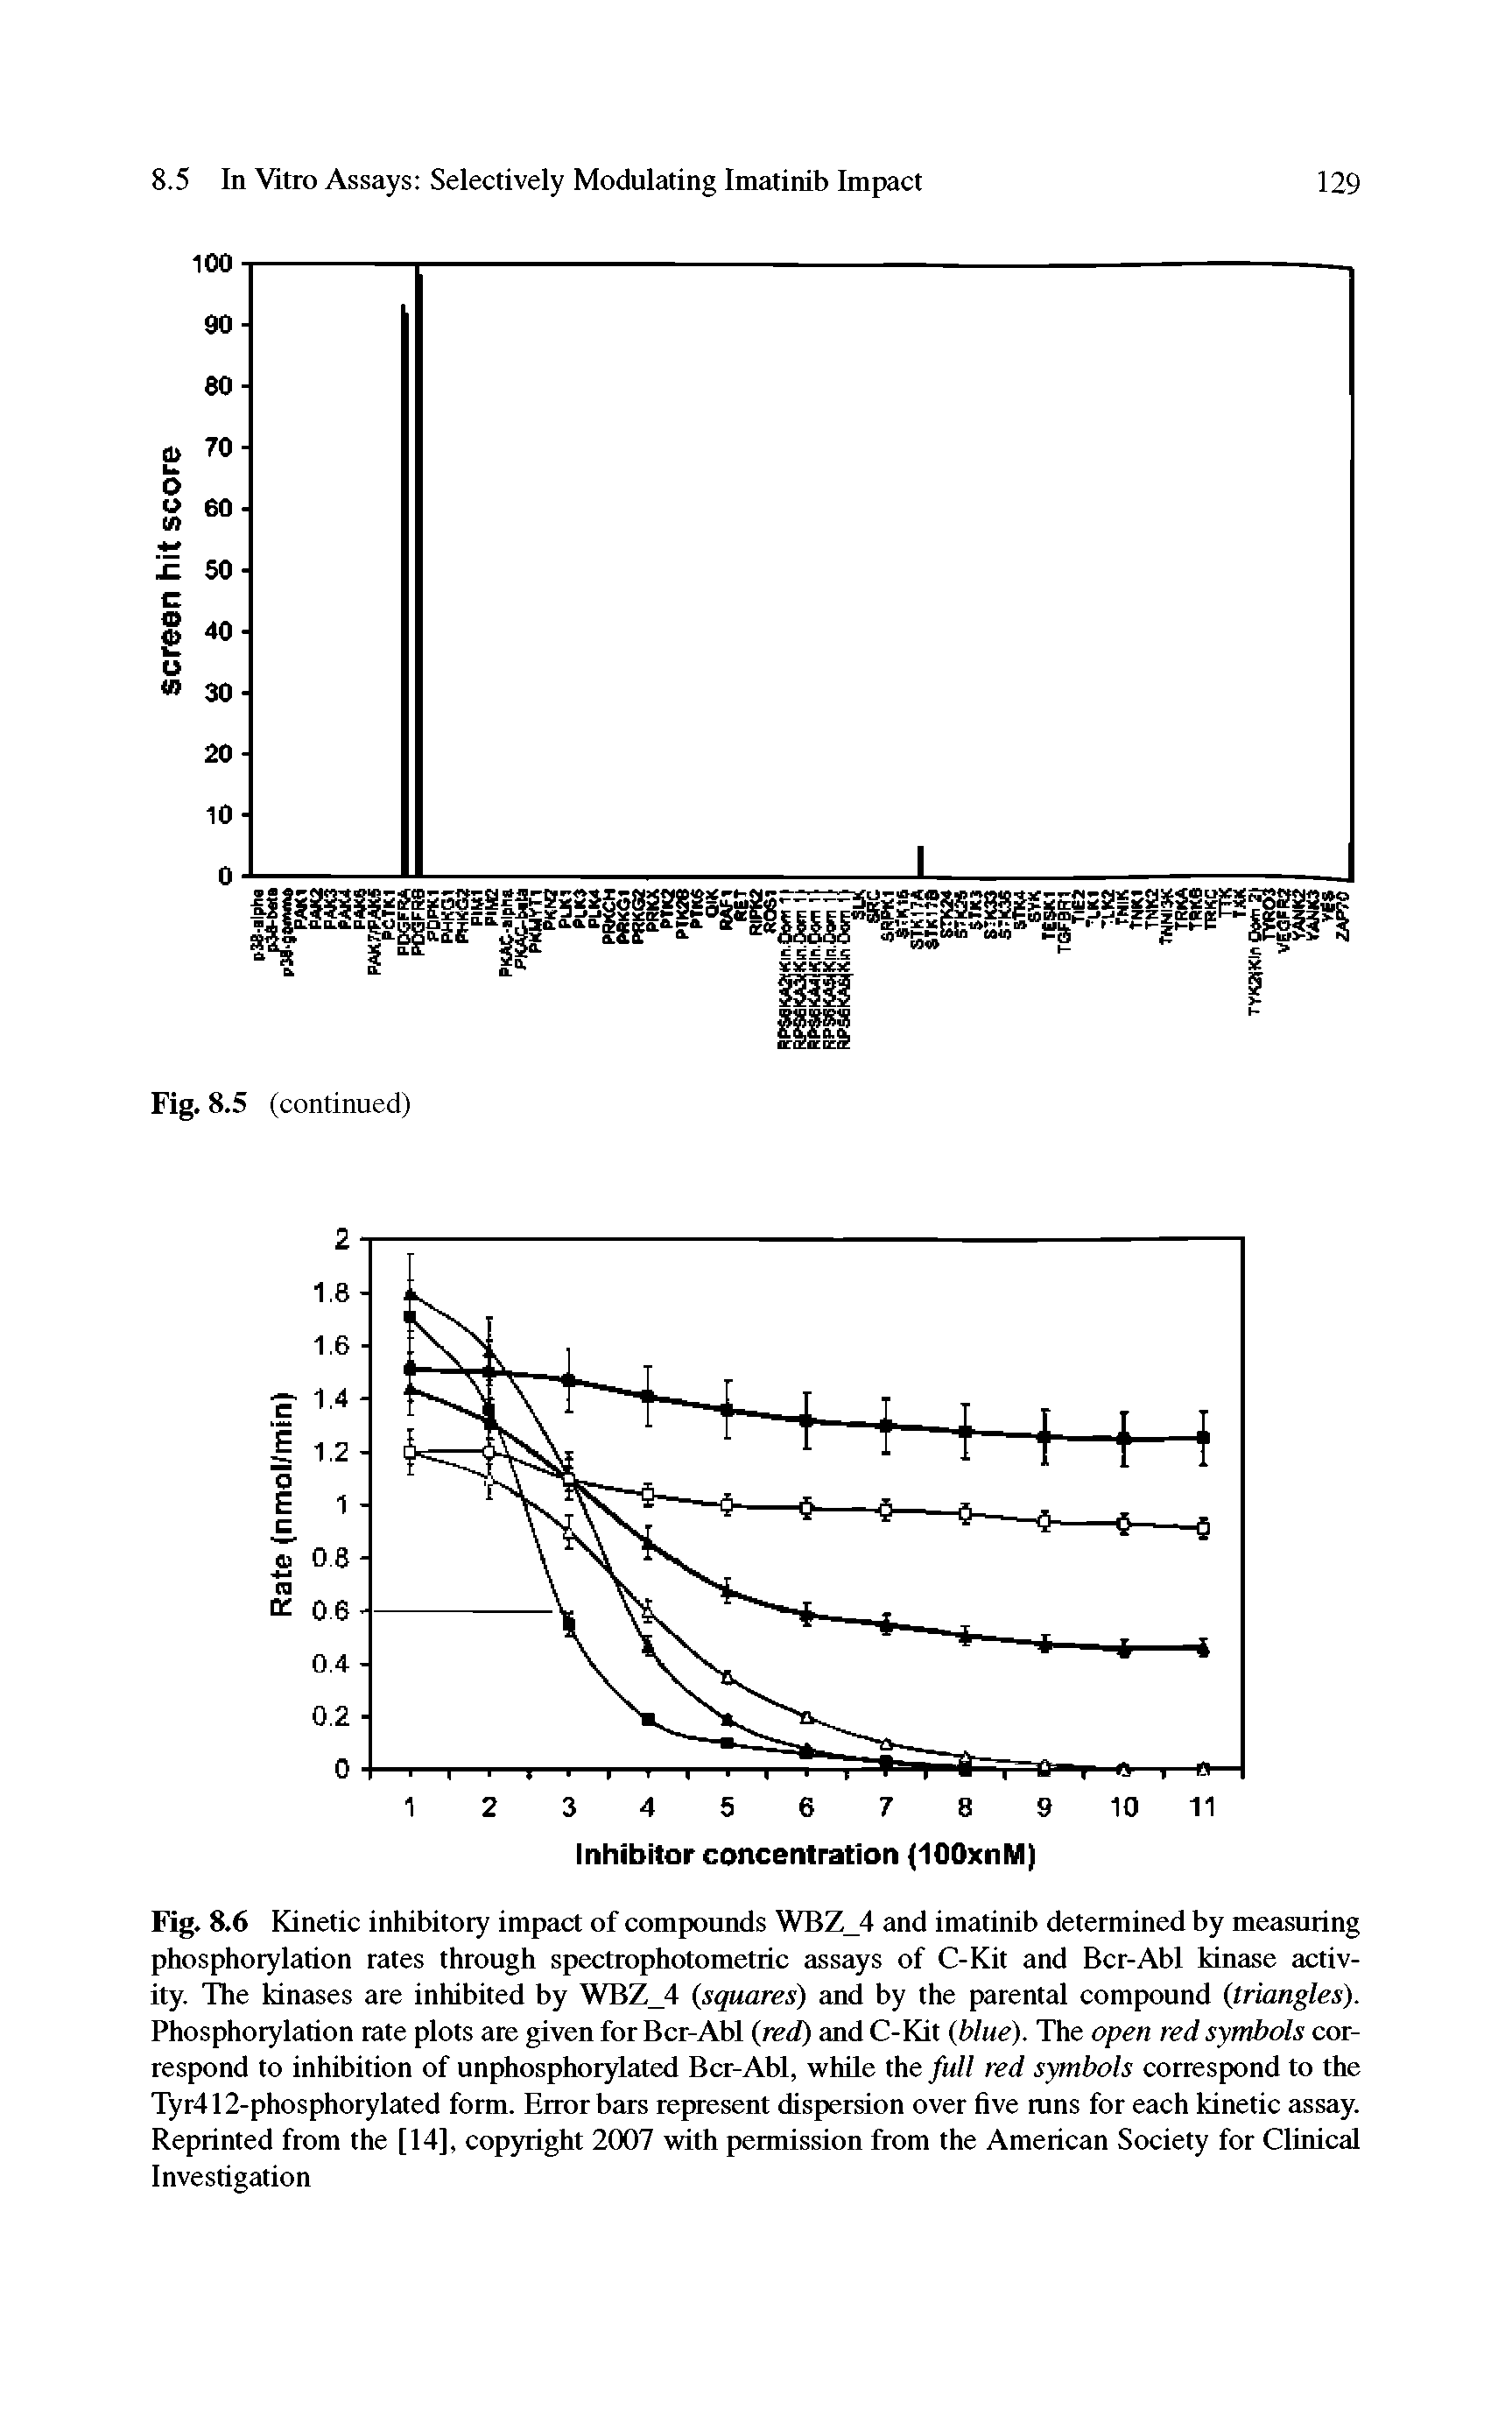 Fig. 8.6 Kinetic inhibitory impact of compounds WBZ 4 and imatinib determined by measuring phosphorylation rates through spectrophotometric assays of C-Kit and Bcr-Abl kinase activity. The kinases are inhibited by WBZ 4 (squares) and by the parental compound (triangles). Phosphorylation rate plots are given for Bcr-Abl (red) and C-Kit (blue). The open red symbols correspond to inhibition of unphosphorylated Bcr-Abl, while the full red symbols correspond to the Tyr412-phosphorylated form. Error bars represent dispersion over five runs for each kinetic assay. Reprinted from the [14], copyright 2007 with permission from the American Society for Clinical Investigation...